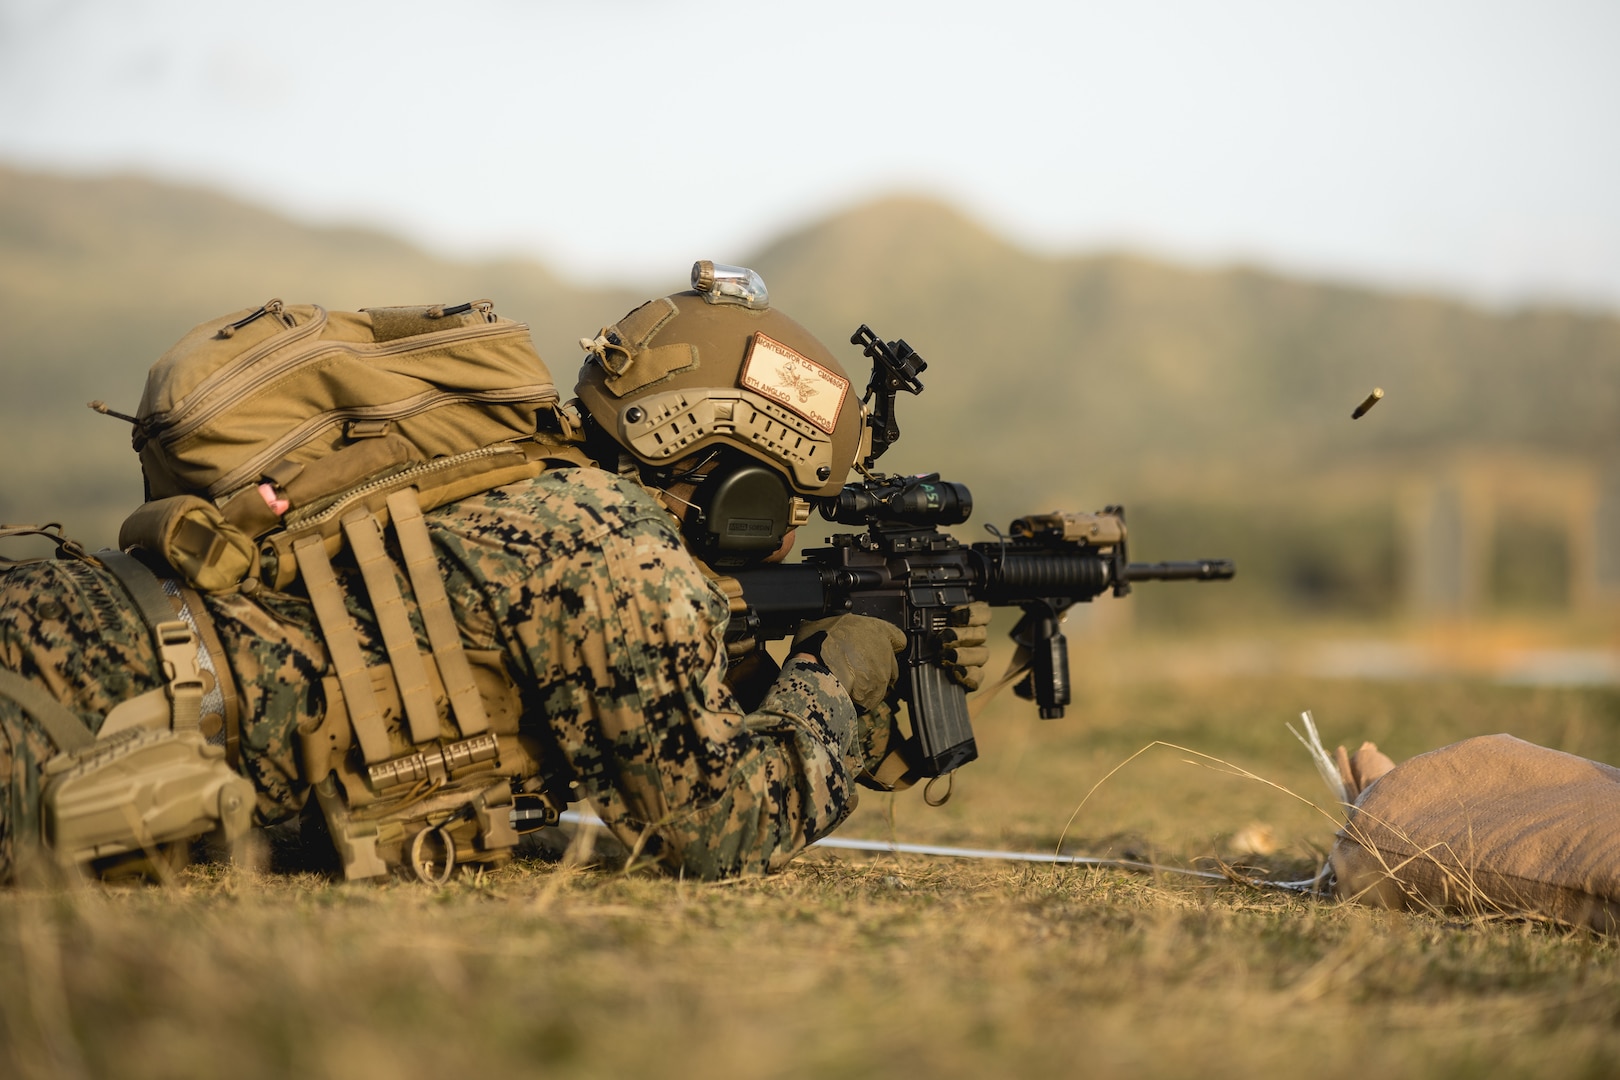 U.S. Marine Corps Lance Cpl. Christian Montemayor, a fire support Marine, with 5th Air Naval Gunfire Liaison Company, III Marine Expeditionary Force Information Group, fires an M4 carbine during a Marine Corps Combat Marksmanship Program range as part of 2nd Brigade Platoon’s field exercise on Camp Hansen, Okinawa, Japan, Feb. 14, 2024. This CMP allows Marines to maintain weapon proficiency by engaging targets in a stress-induced environment with primary and secondary weapon systems. 5th ANGLICO Marines refined their marksmanship fundamentals that enhanced their lethality through advanced marksmanship training. Montemayor is a native of San Diego. (U.S. Marine Corps photo by Staff Sgt. Manuel A. Serrano)